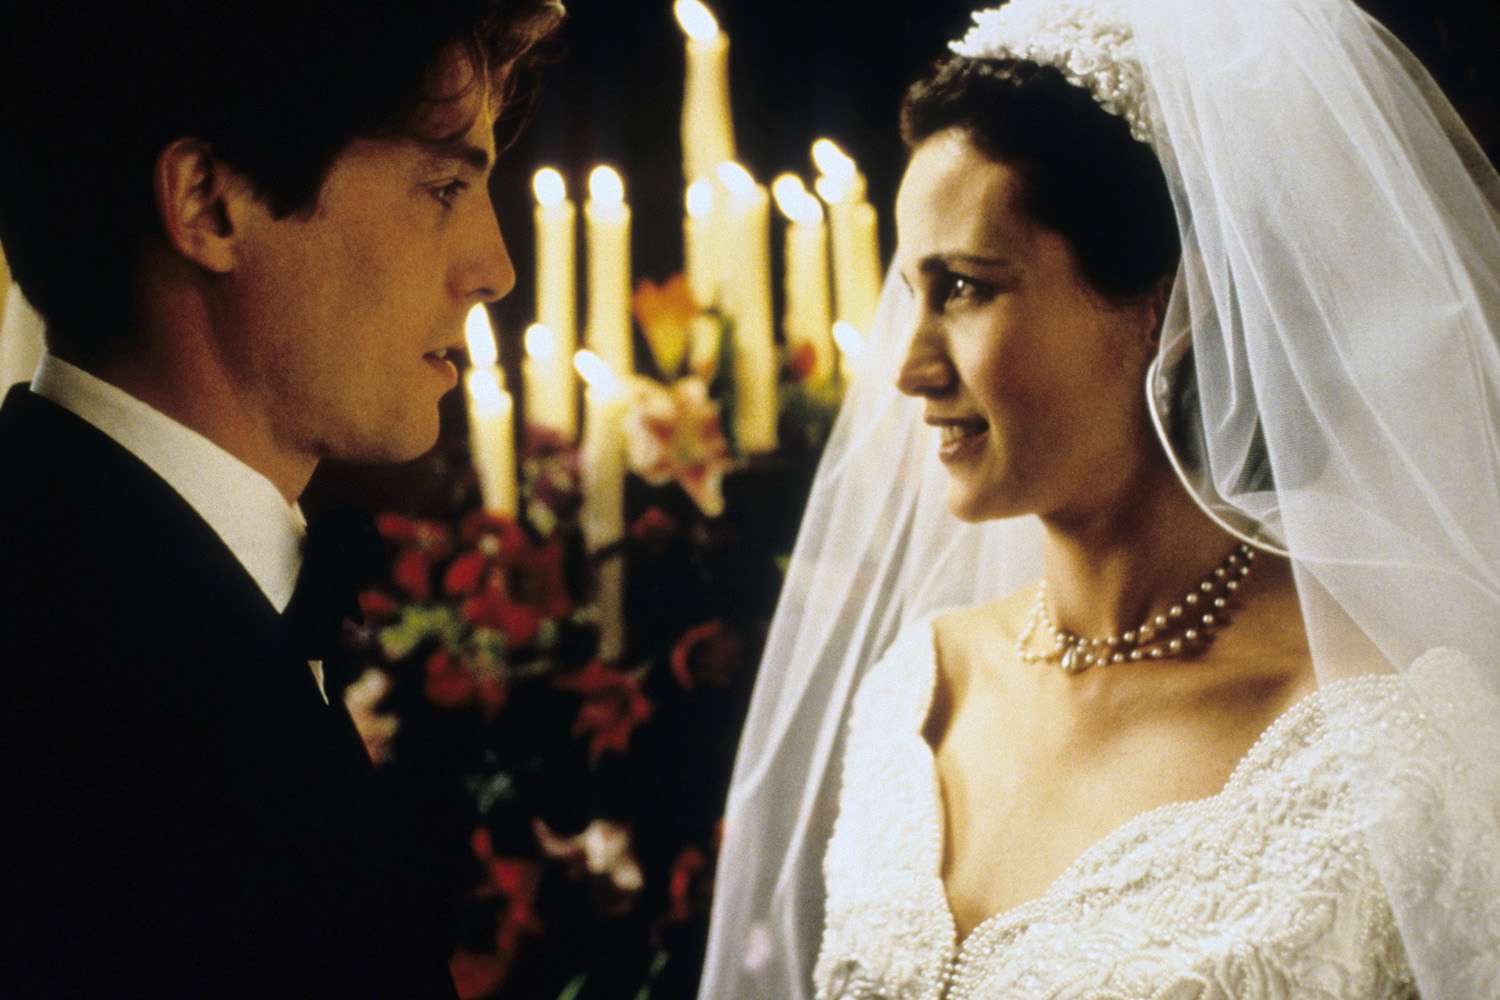 FOUR WEDDINGS AND A FUNERAL, from left: Hugh Grant, Andie MacDowell